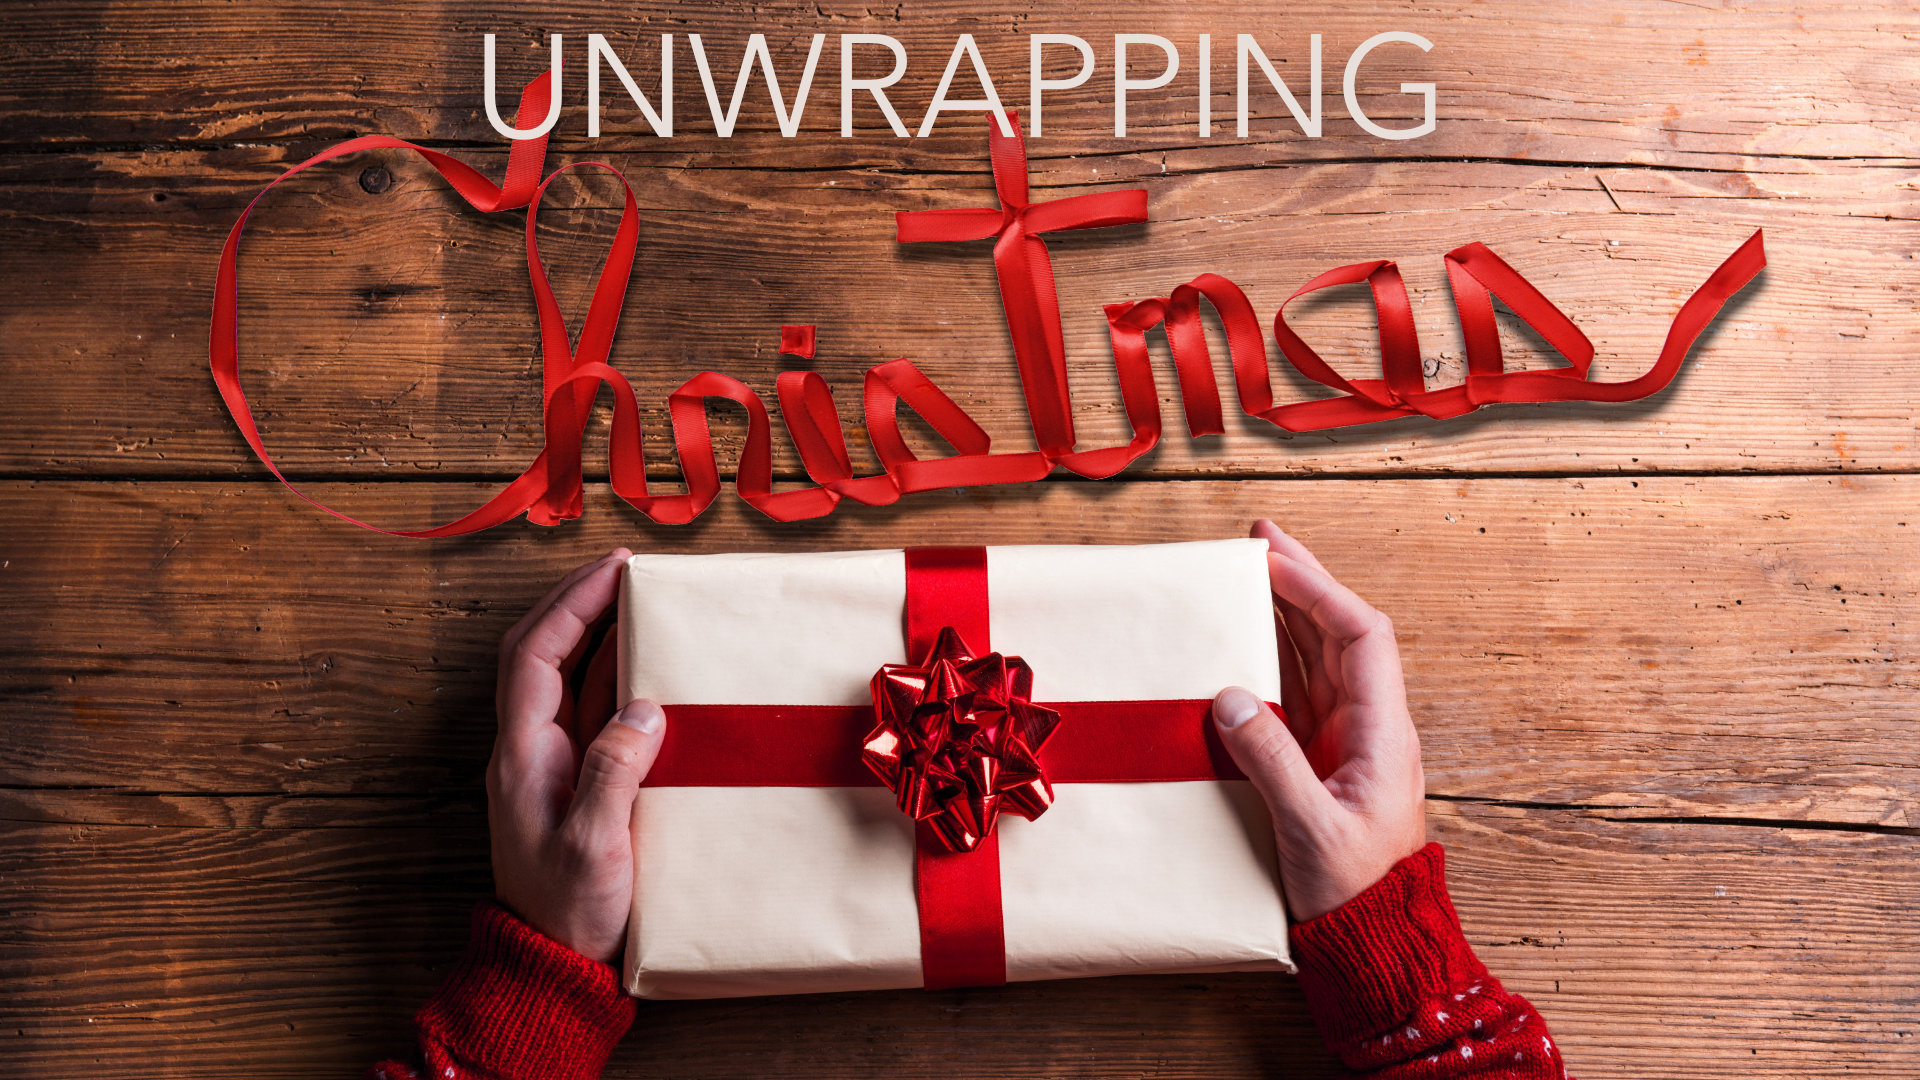 Unwrapping Christmas • Dec. 4 - 25, 2017